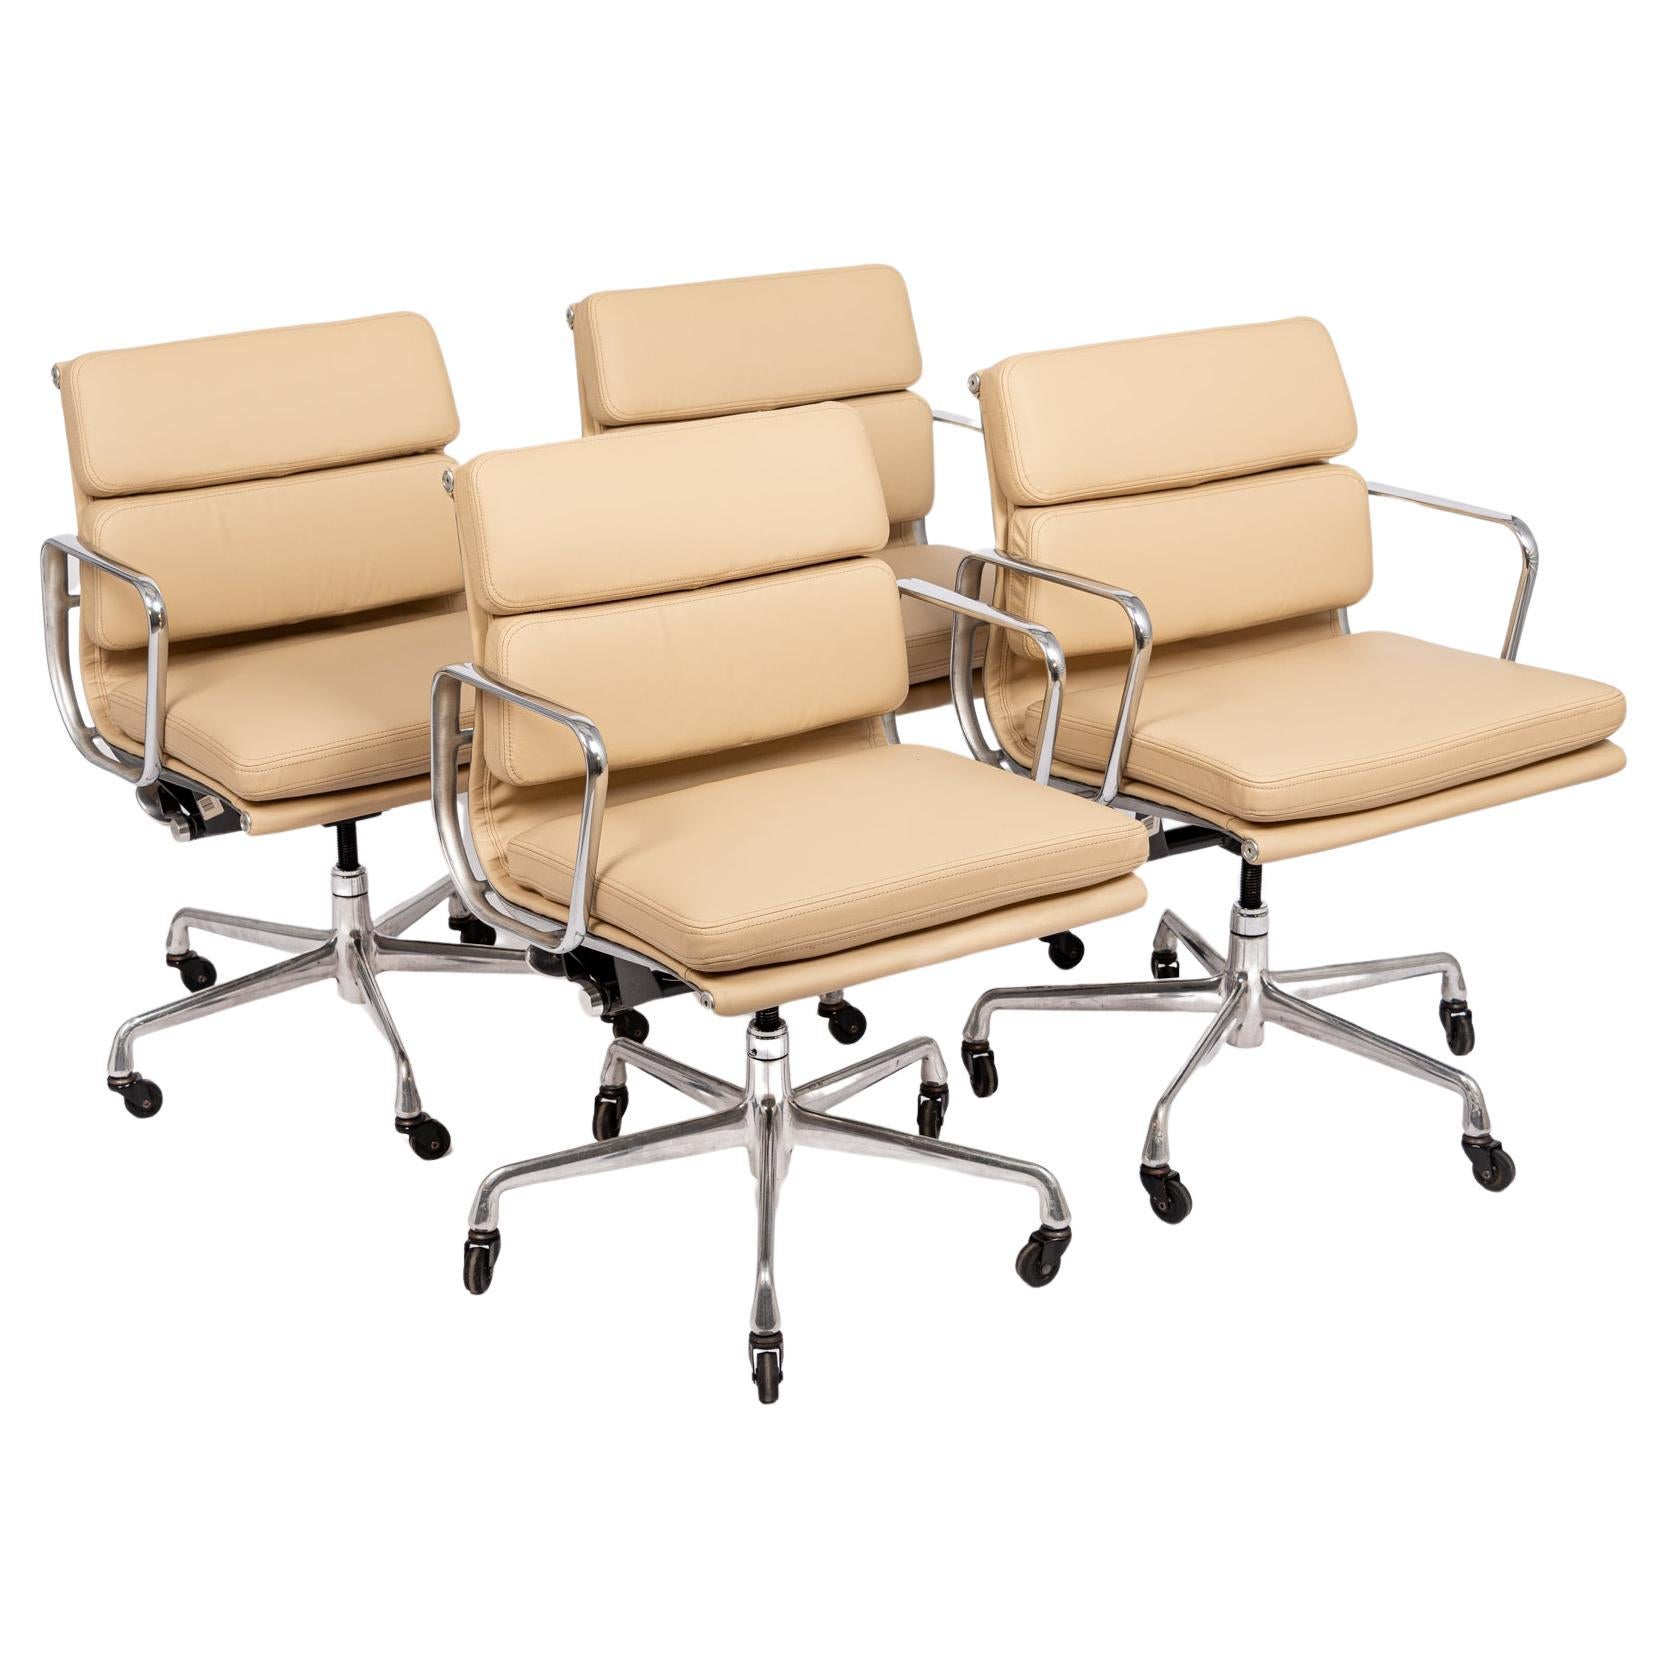 Mid-Century Modern 6 Mid Century Cream Leather Office Chairs by Eames for Herman Miller